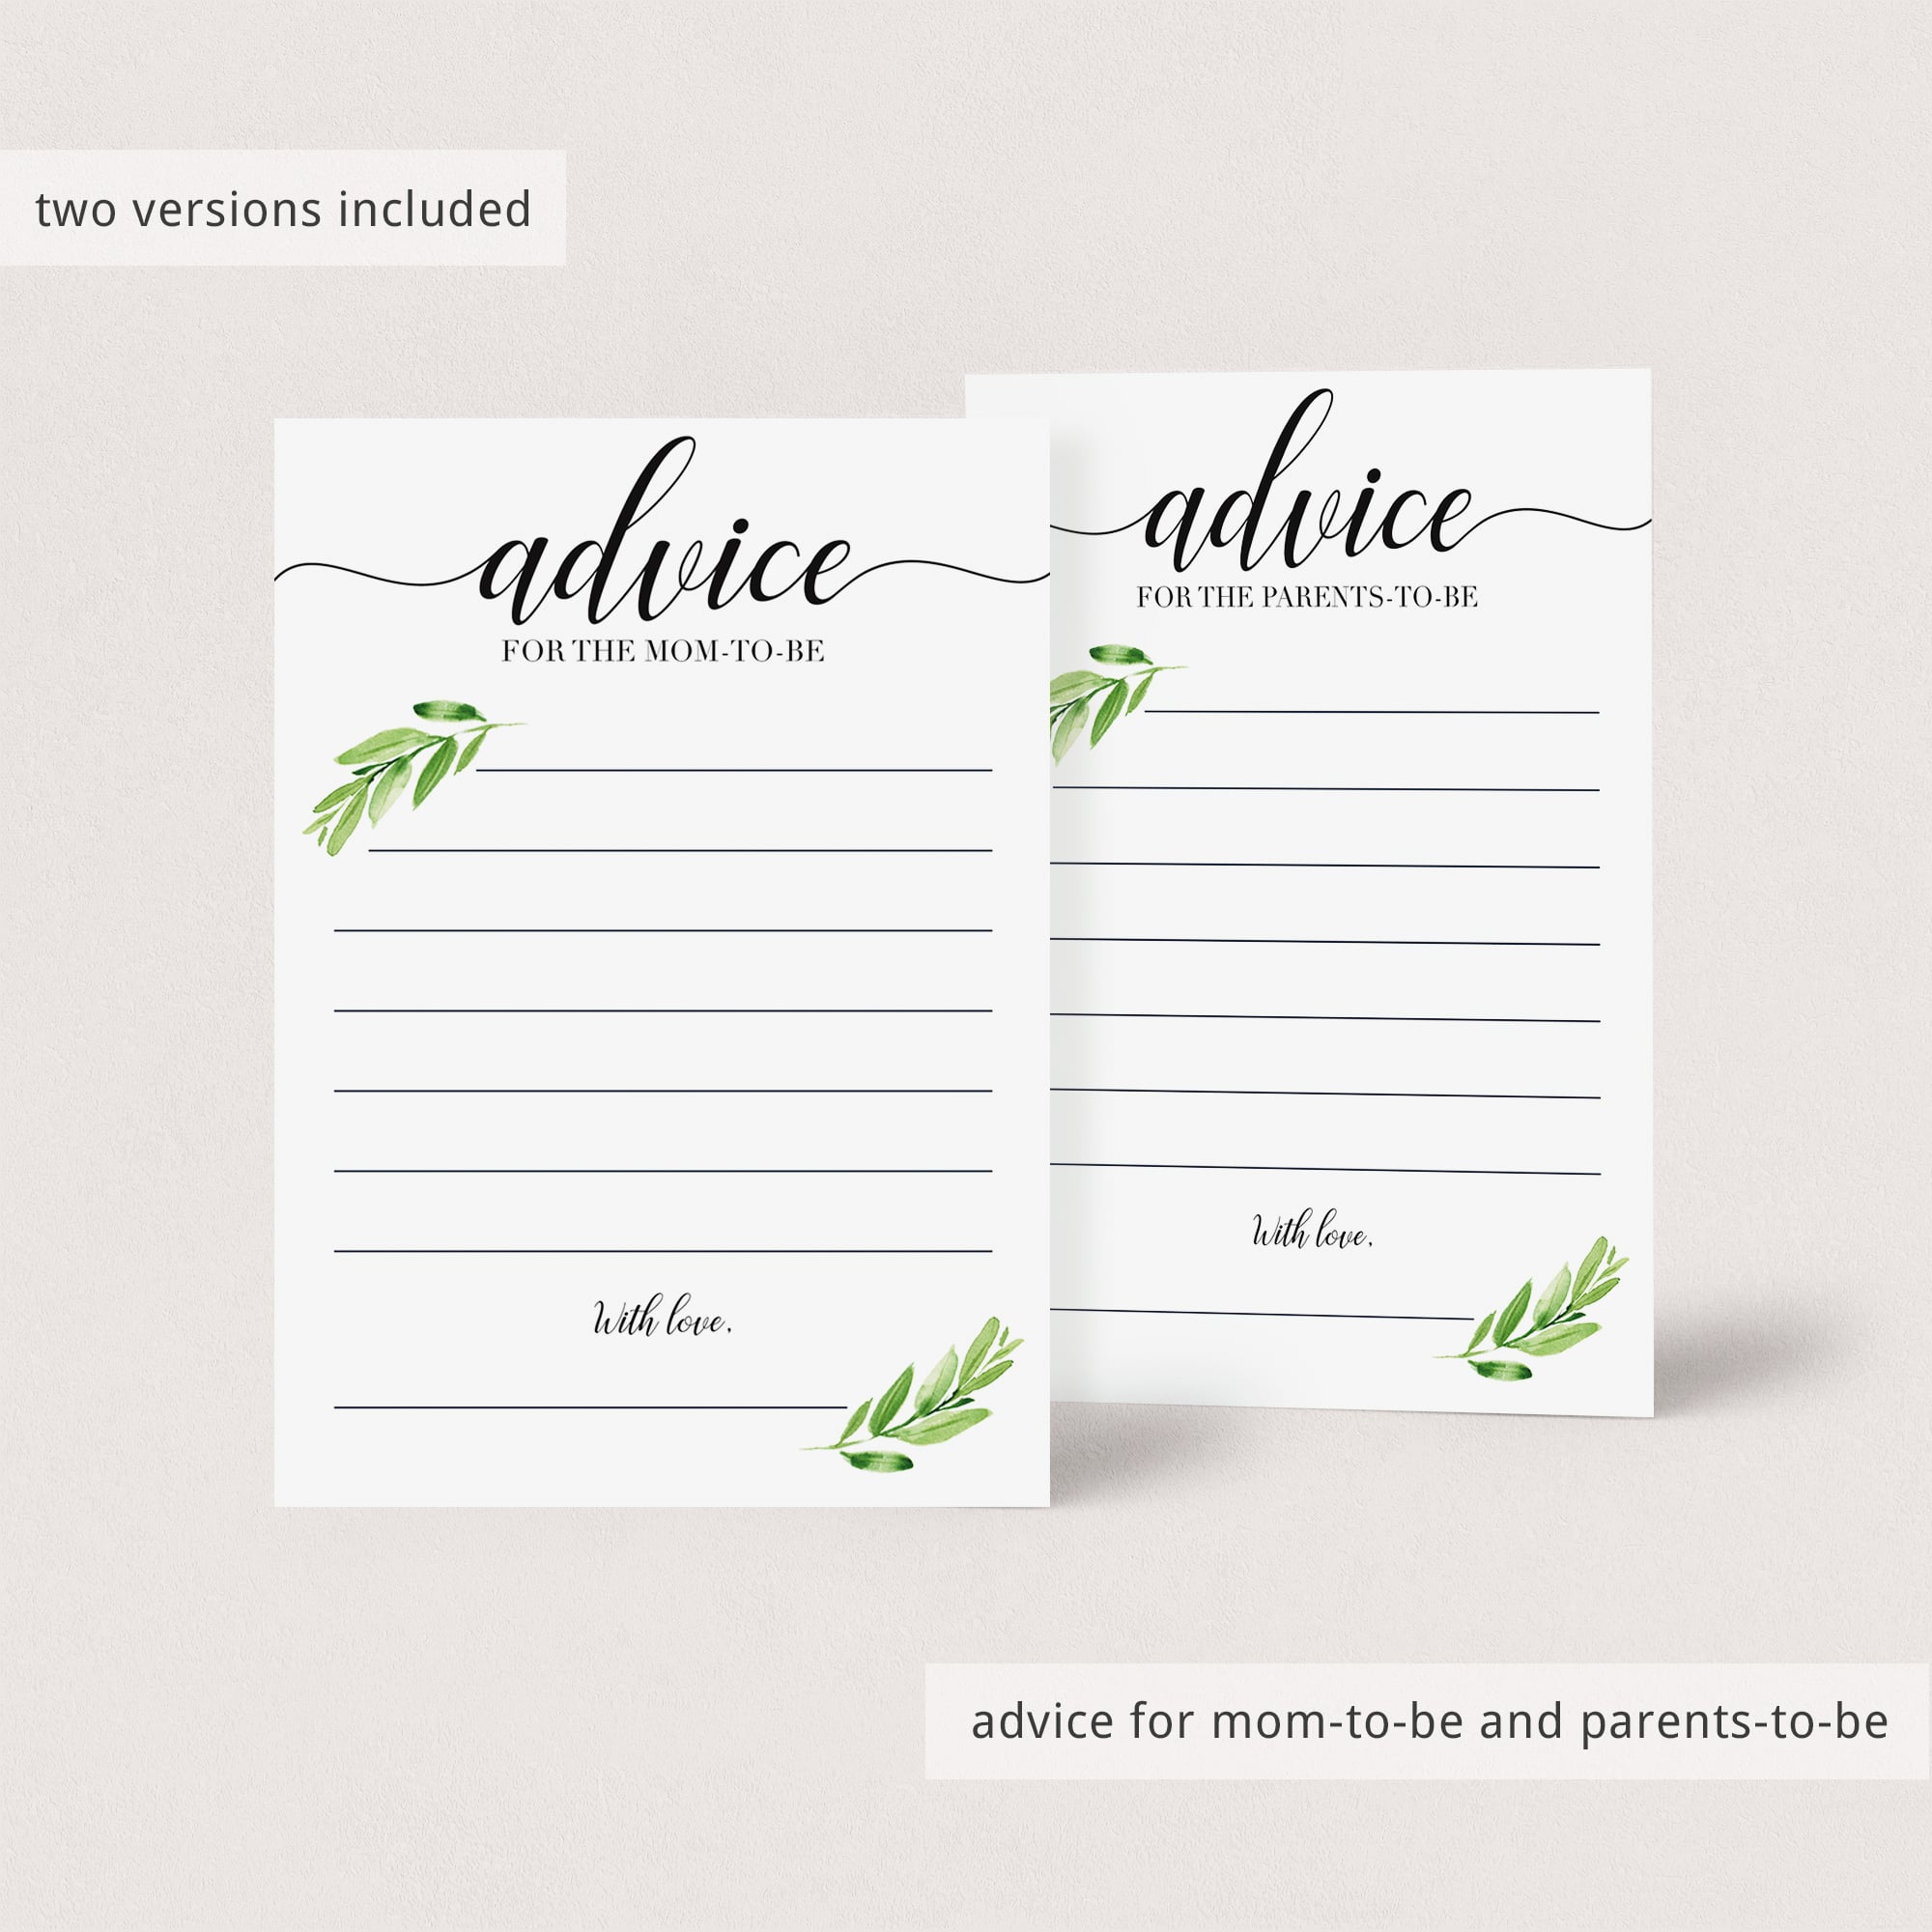 Printable advice cards for baby shower by LittleSizzle